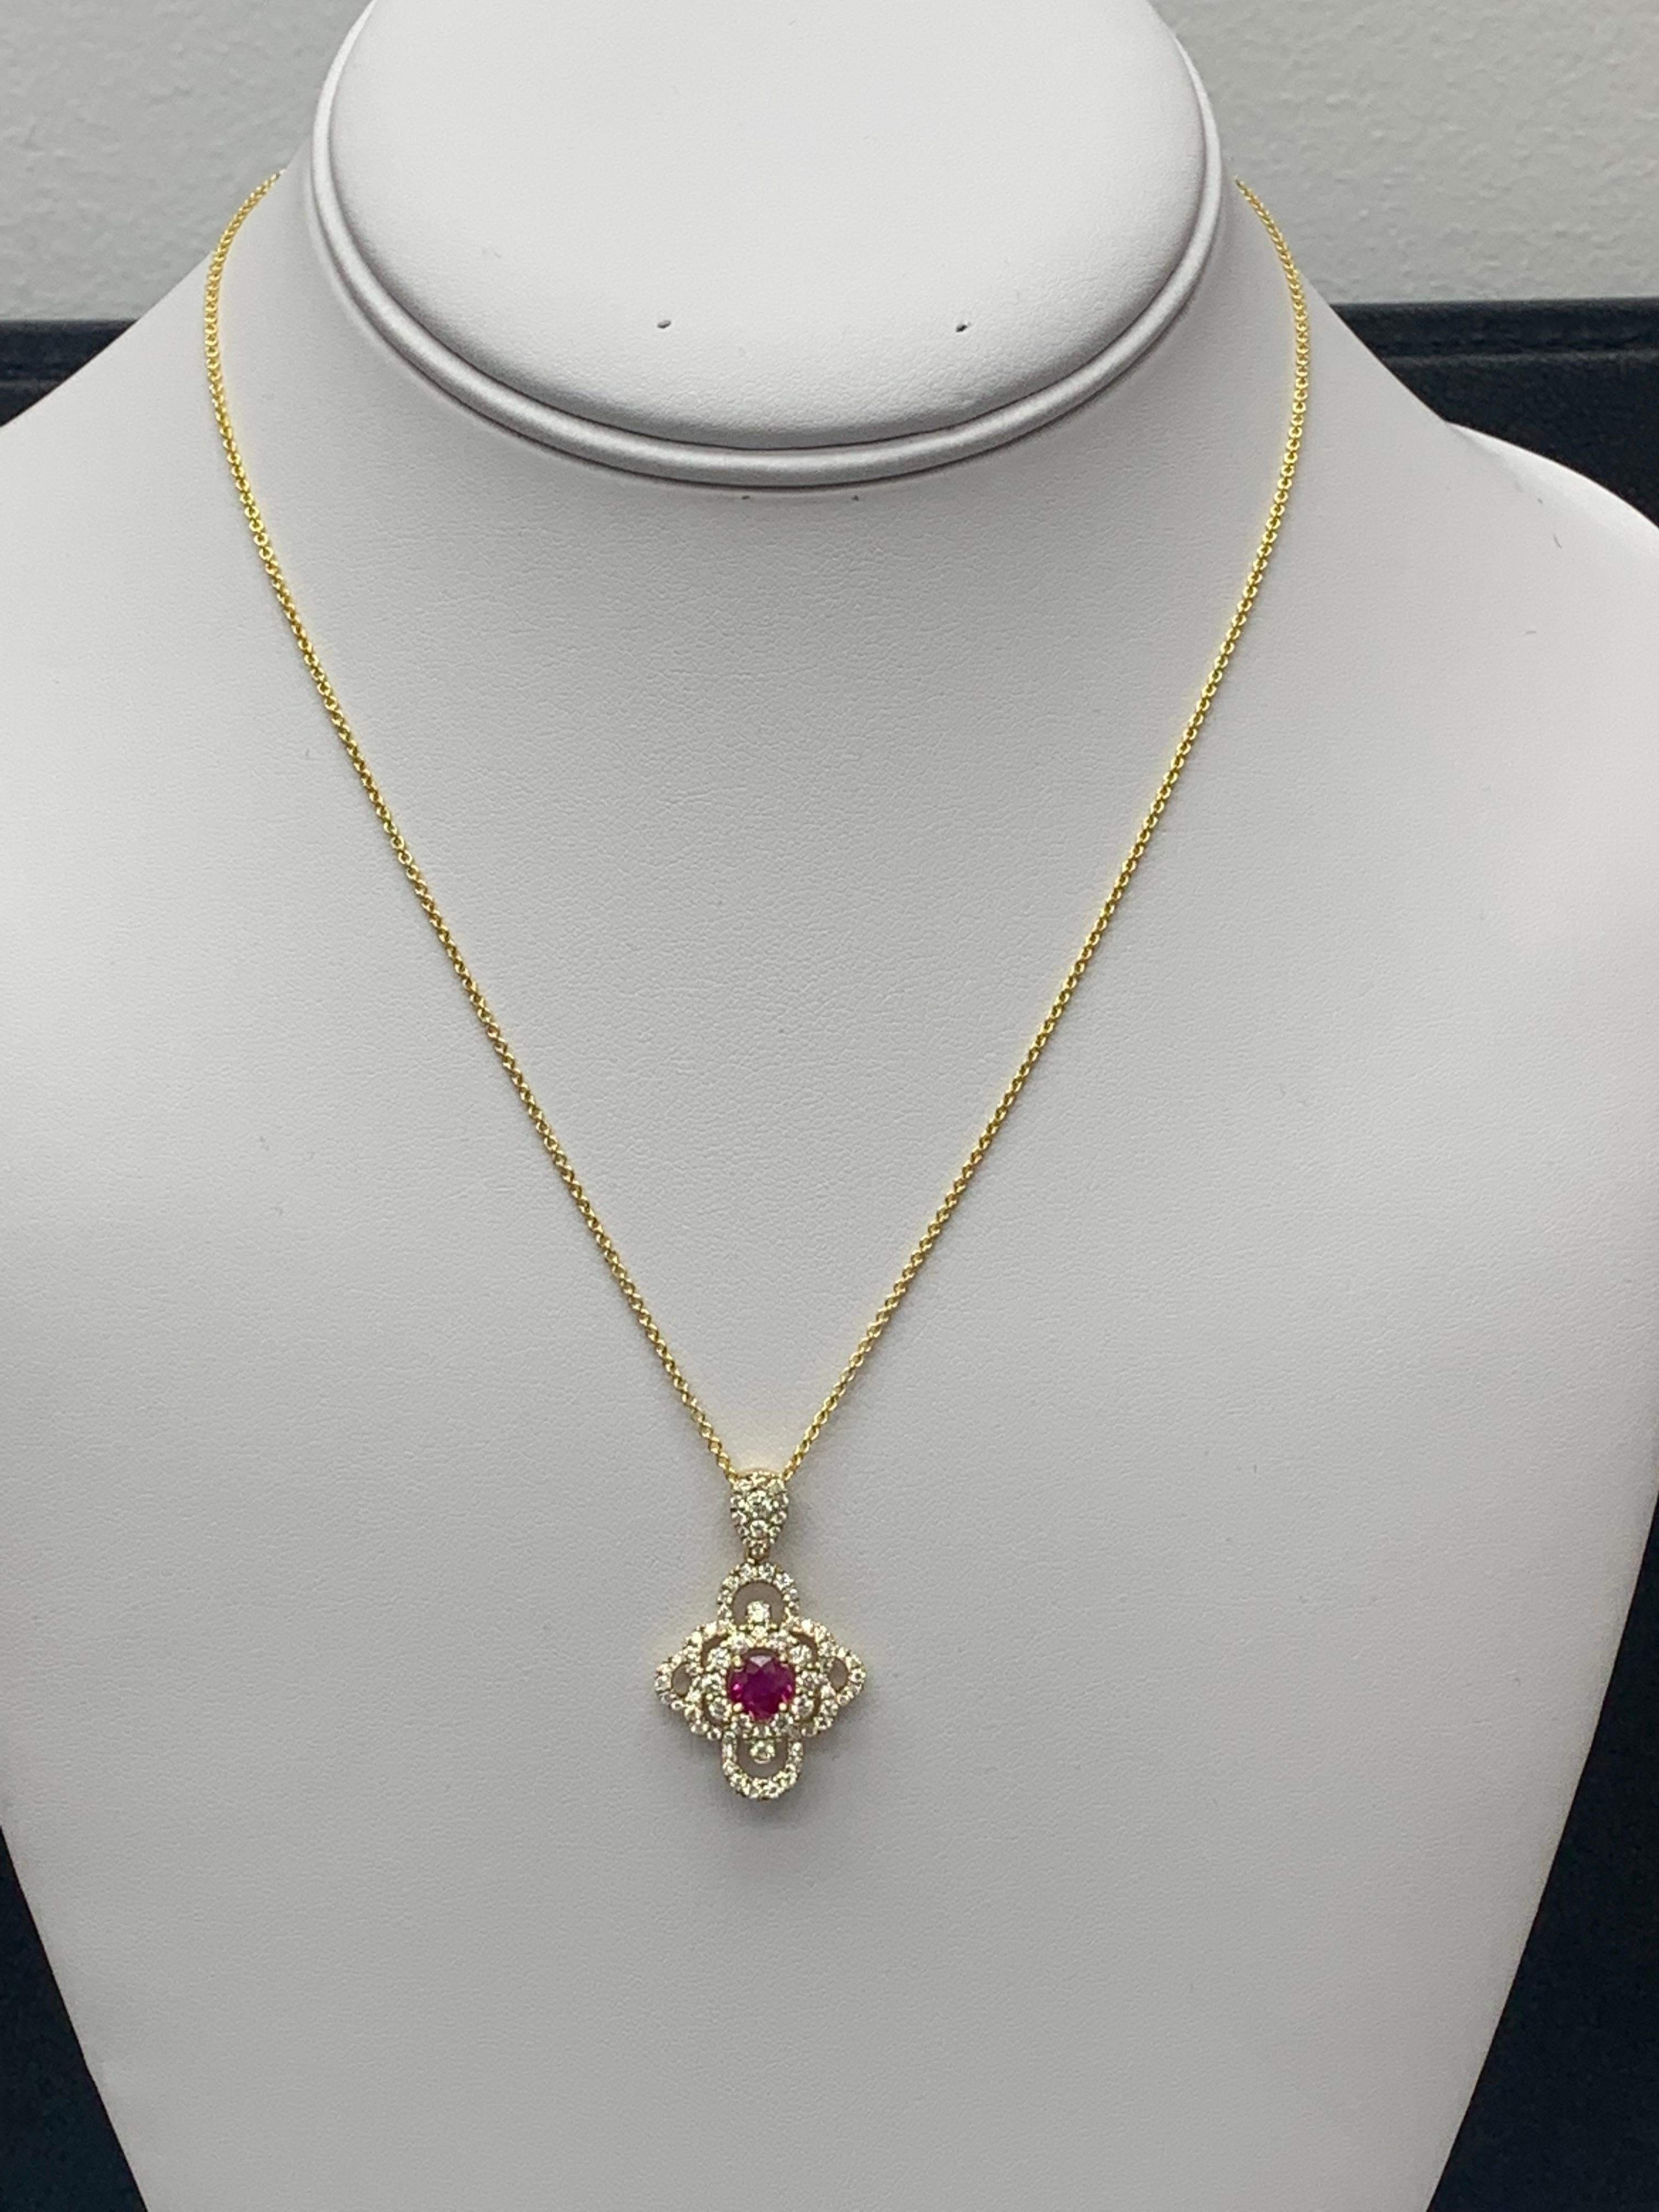 A Classic pendant necklace Set with a round ruby center stone accented by 76 accent brilliant diamonds in an open work design. The weight of diamonds and ruby is 1.03 carats and 0.71 carats respectively. 16